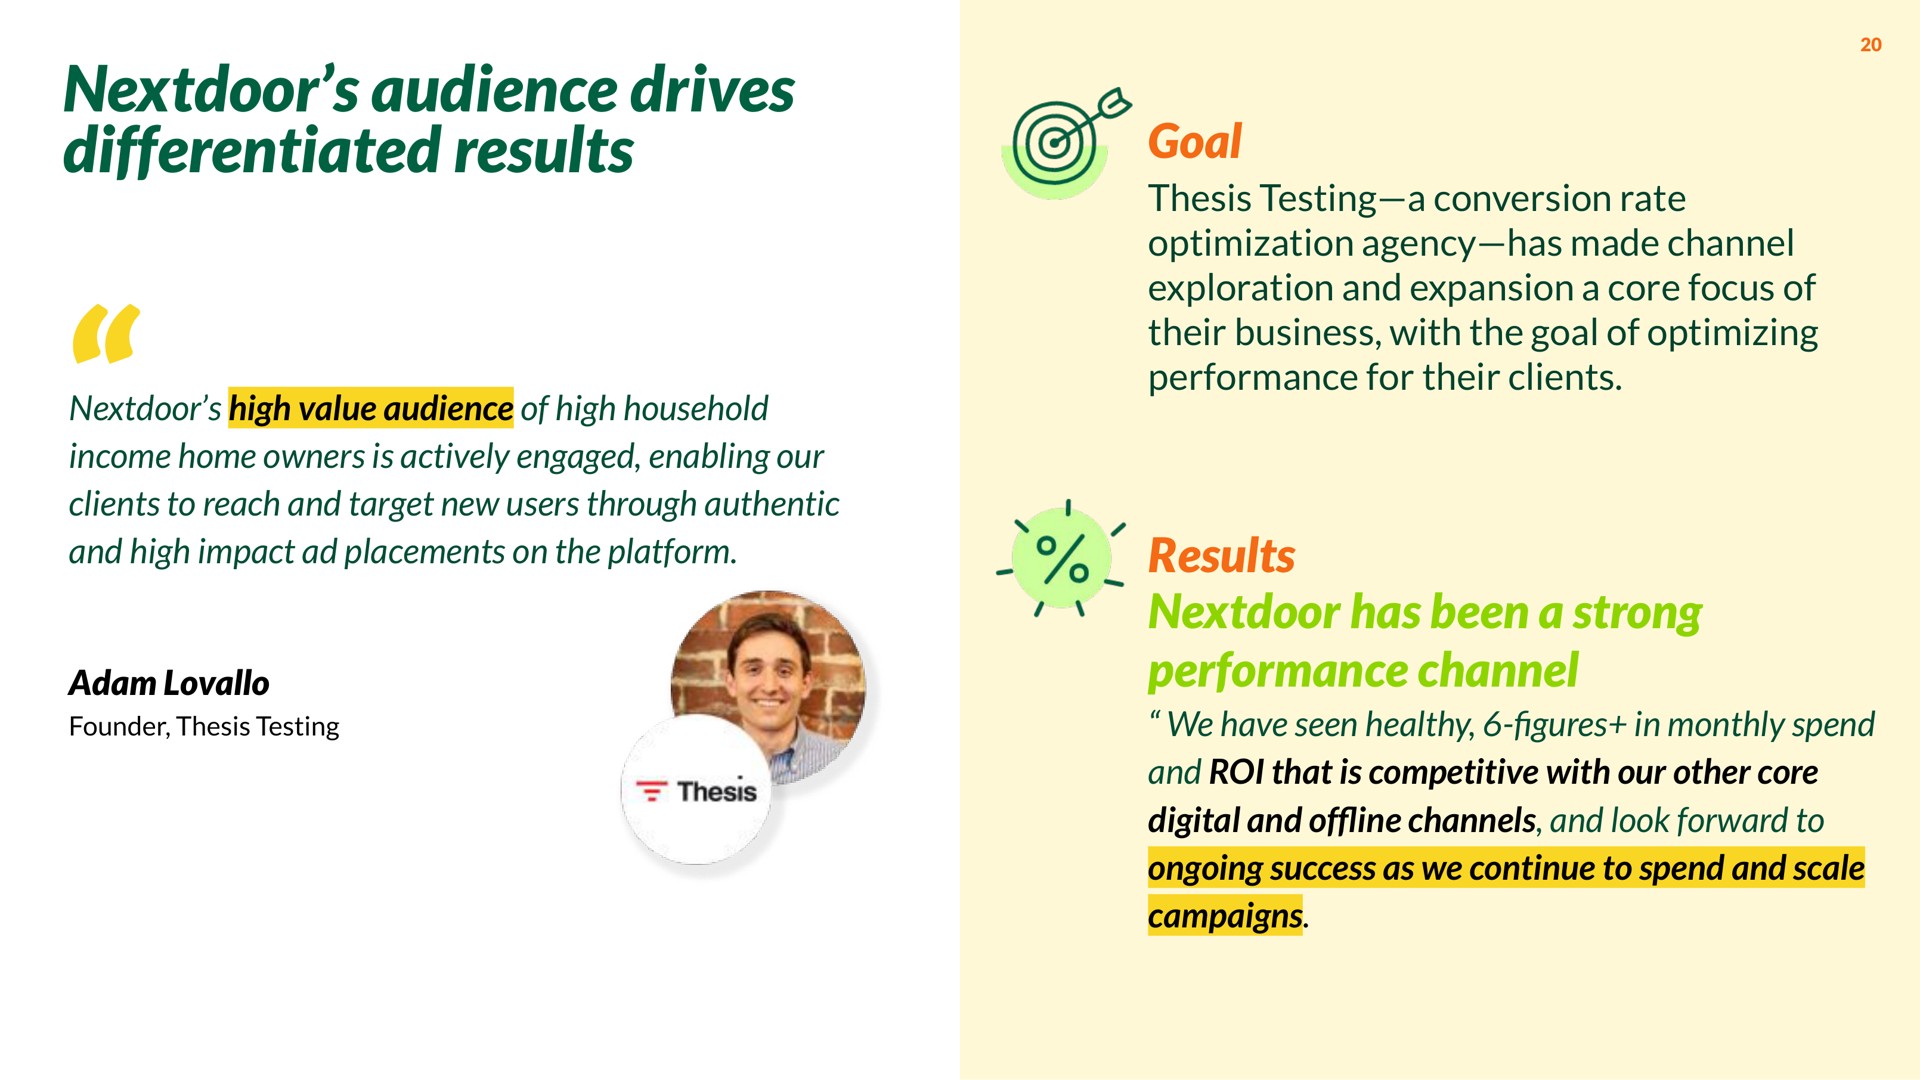 audience drives differentiated results high value audience of high household income home owners is actively engaged enabling our clients to reach and target new users through authentic and high impact placements on the platform goal thesis testing a conversion rate optimization agency has made channel exploration and expansion a core focus of their business with the goal of optimizing performance for their clients results has been a strong performance channel we have seen healthy in monthly spend and roi that is competitive with our other core digital and of channels and look forward to ongoing success as we continue to spend and scale campaigns | Nextdoor